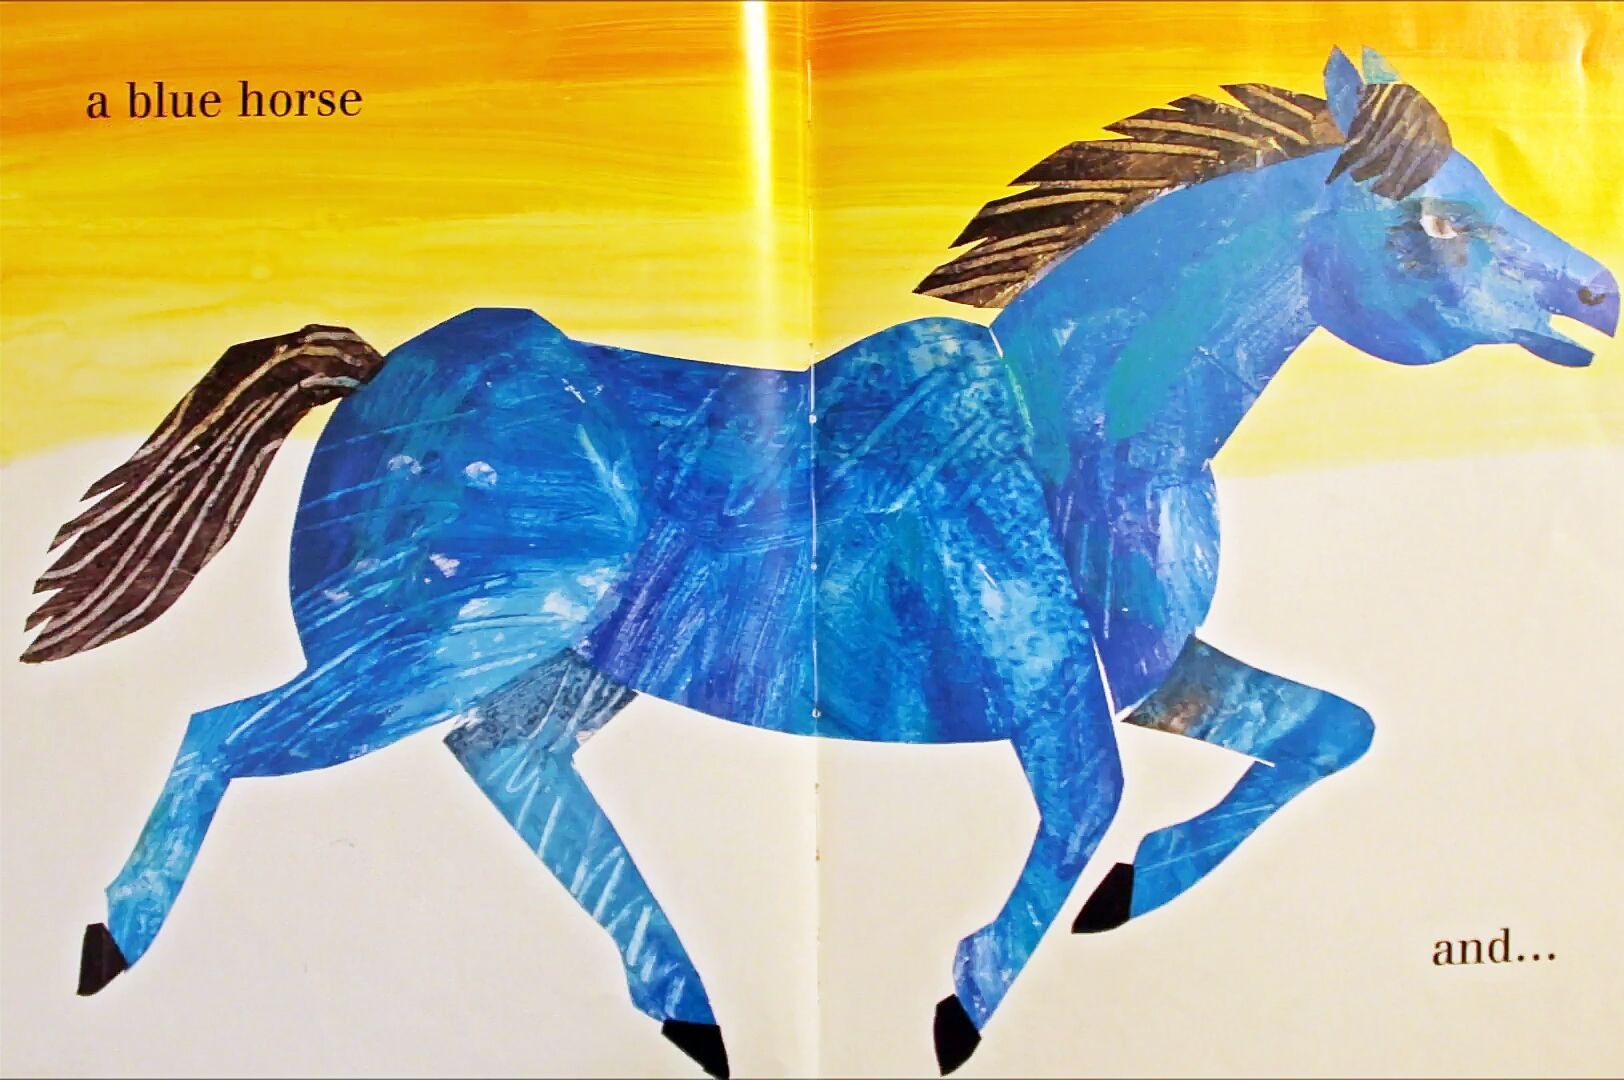 《the artist who painted a blue horse》